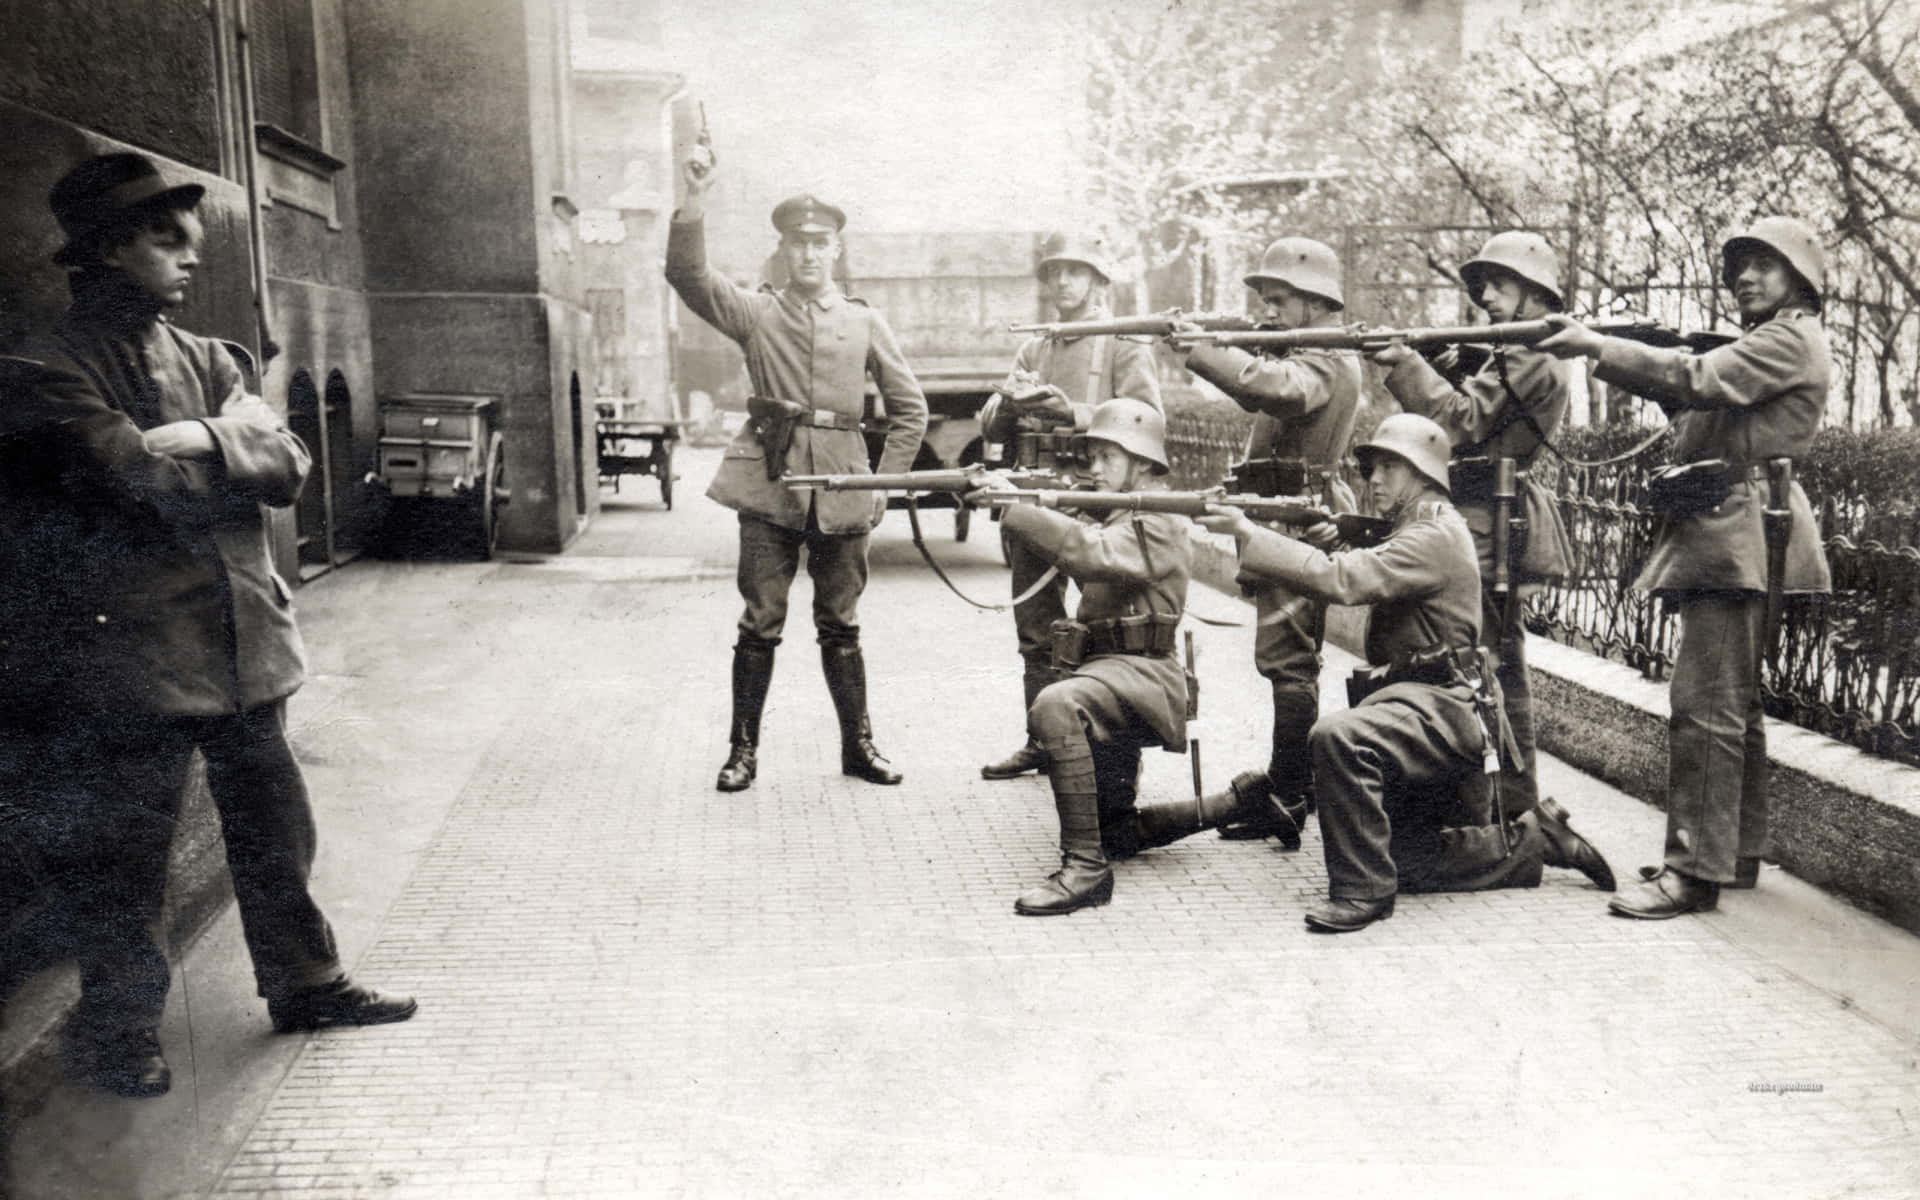 A Group Of Soldiers Are Pointing Their Guns At A Street